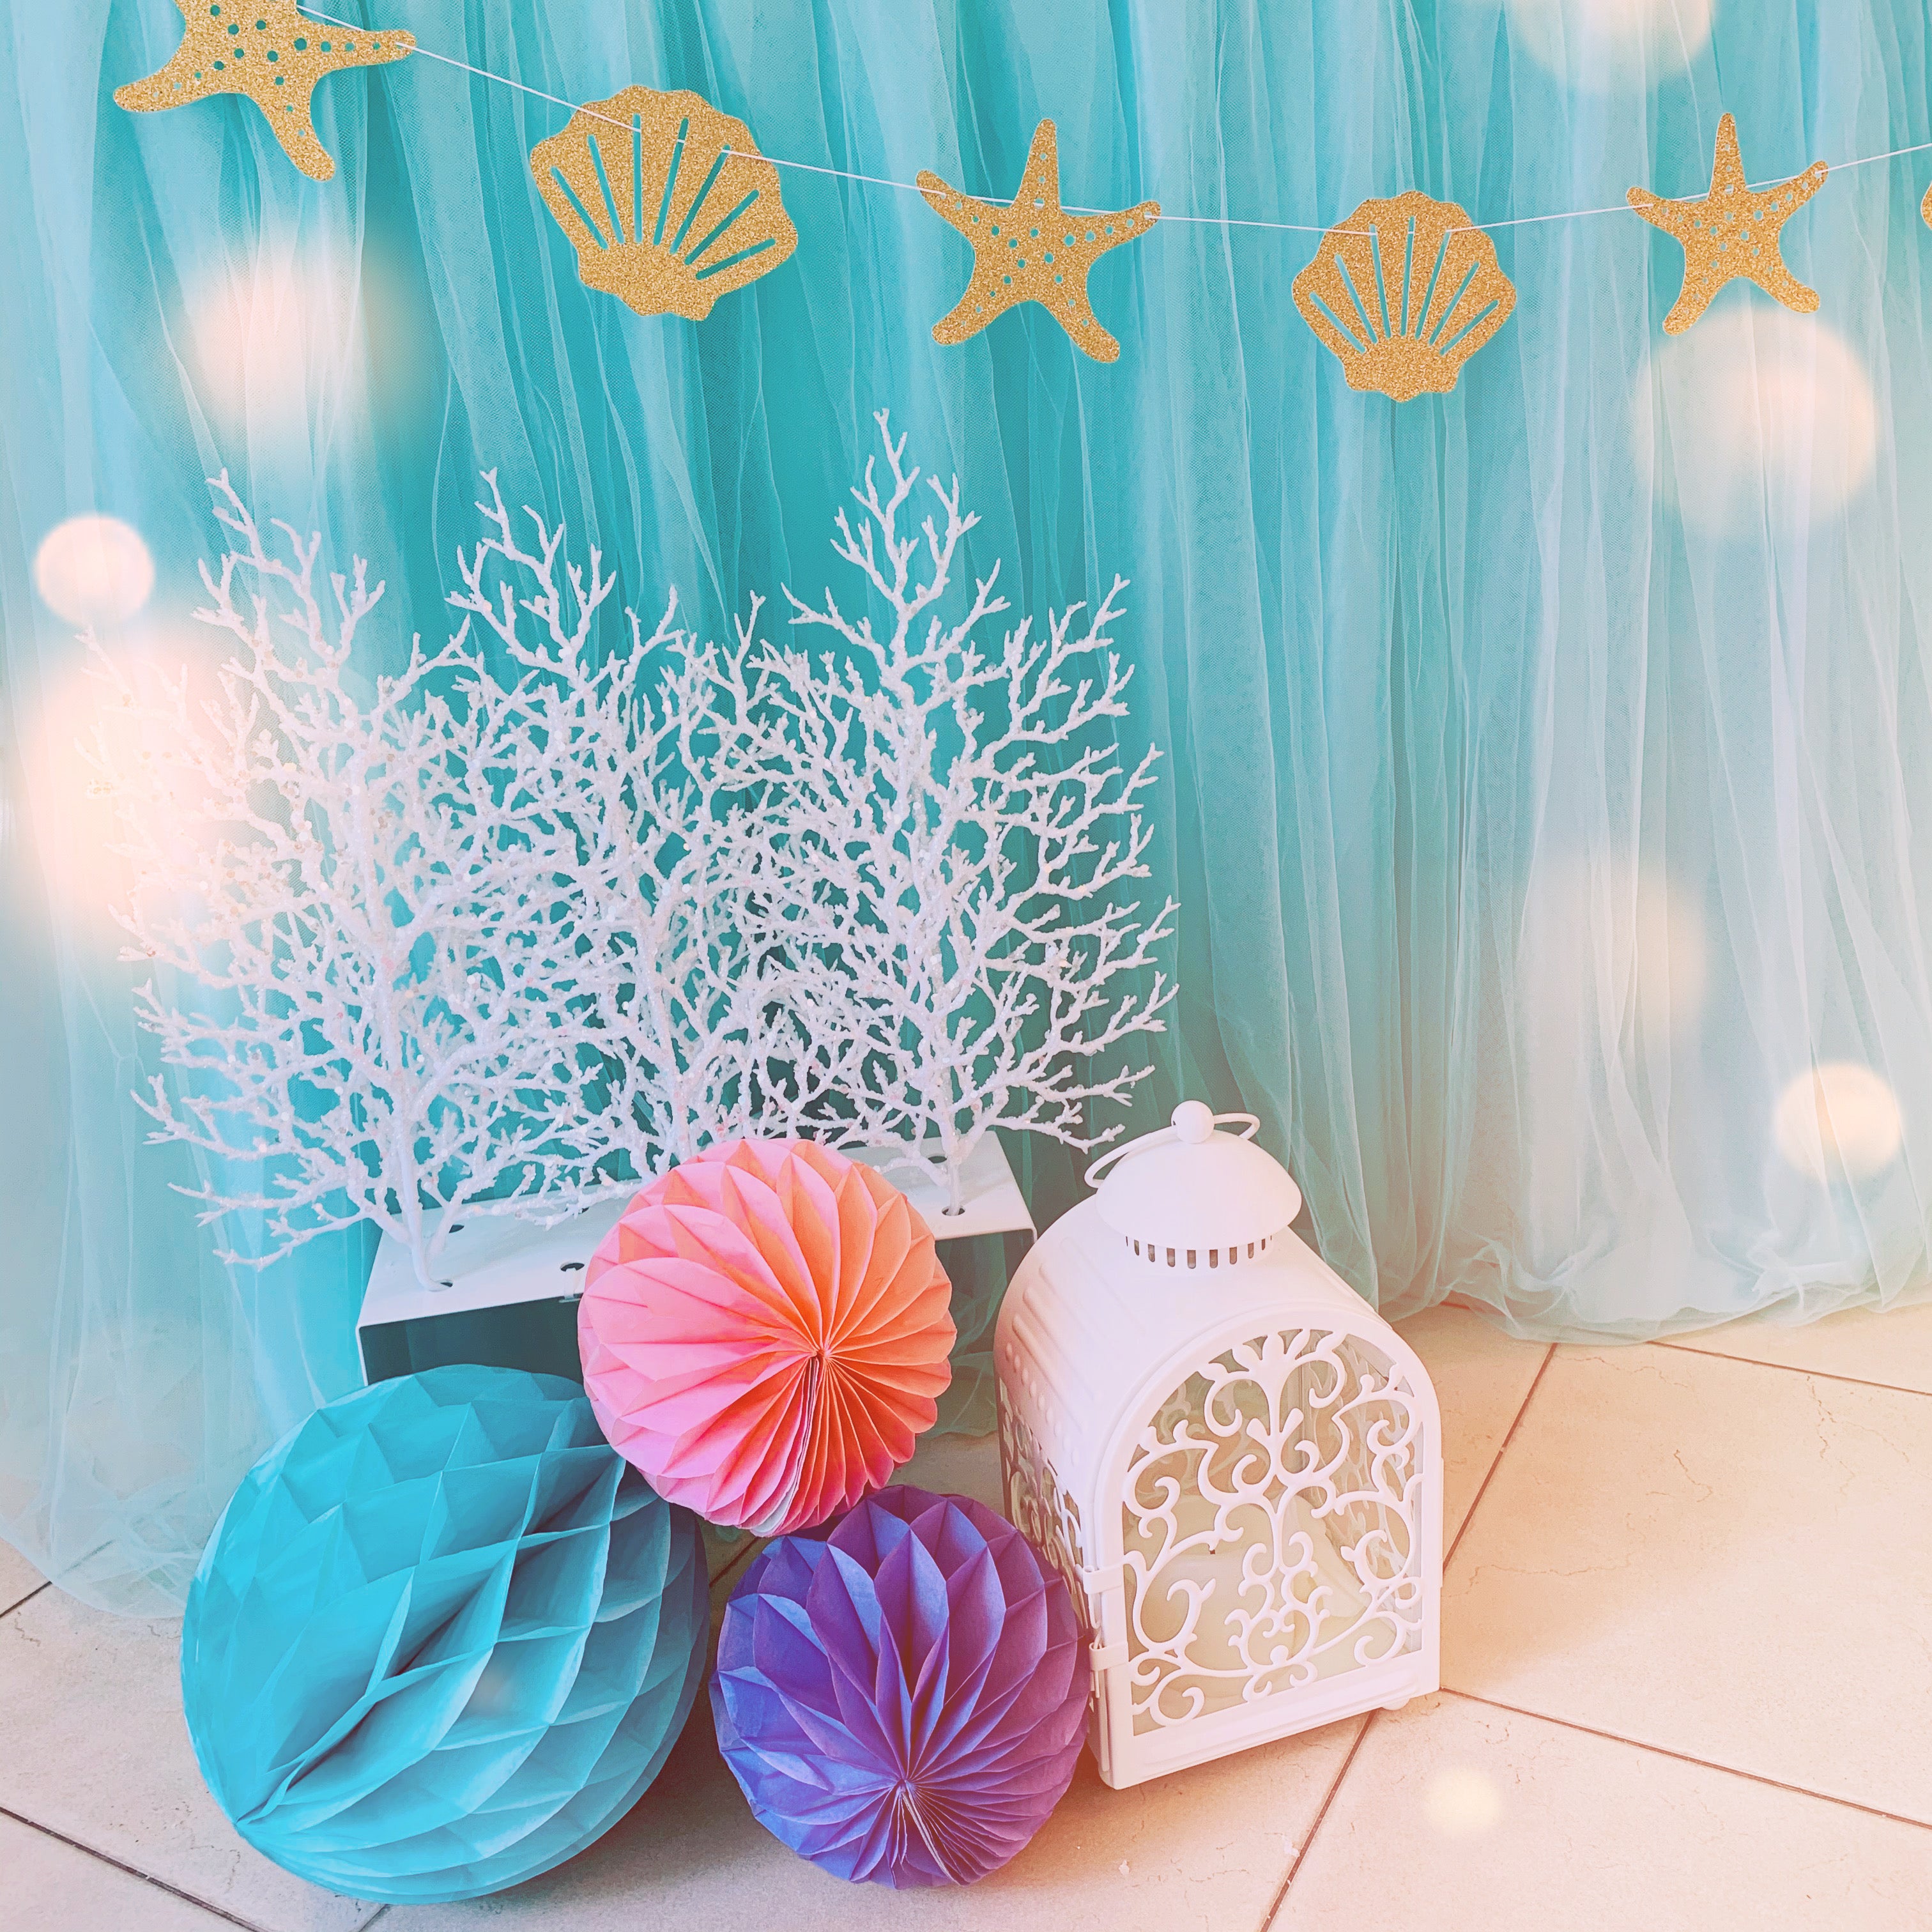 Princess Ariel / Mermaid Dessert Table for Birthday Party by Style It Simply